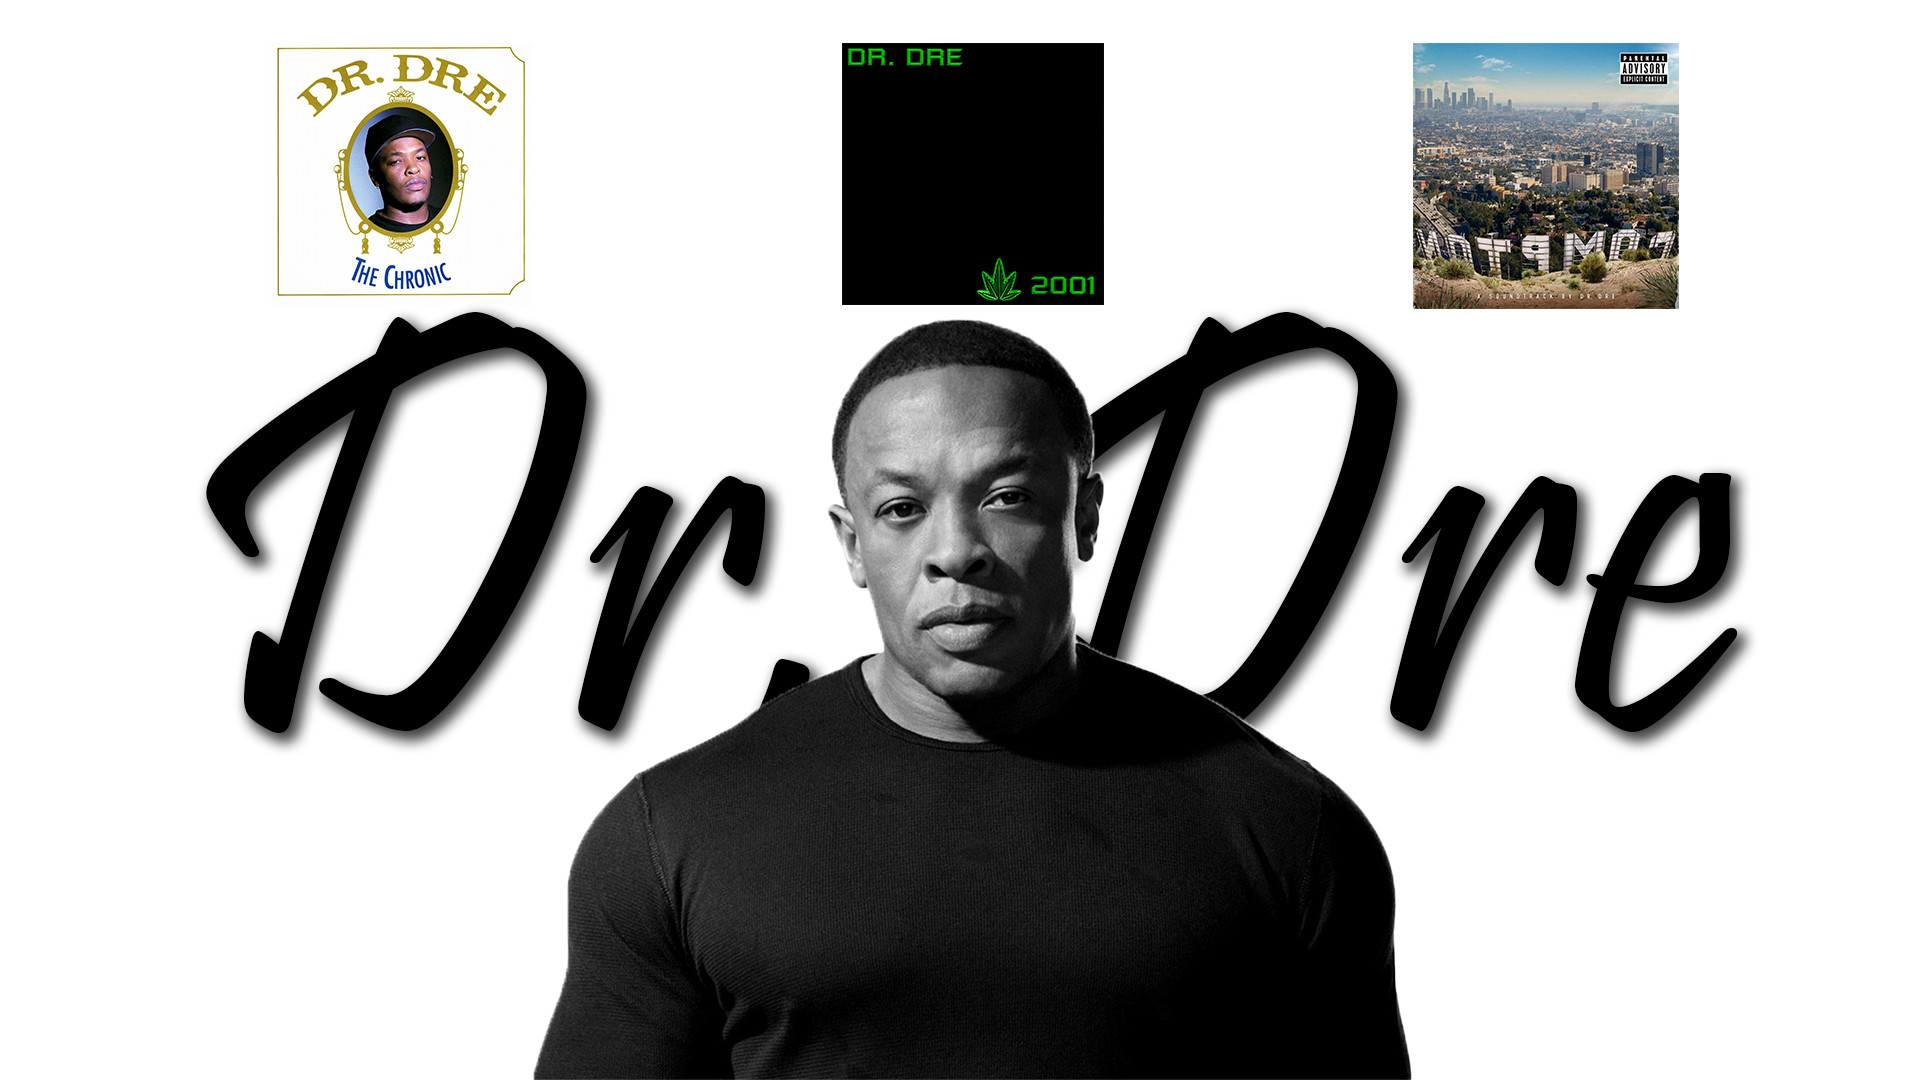 1920x1080 Dr. Dre - Discography[]